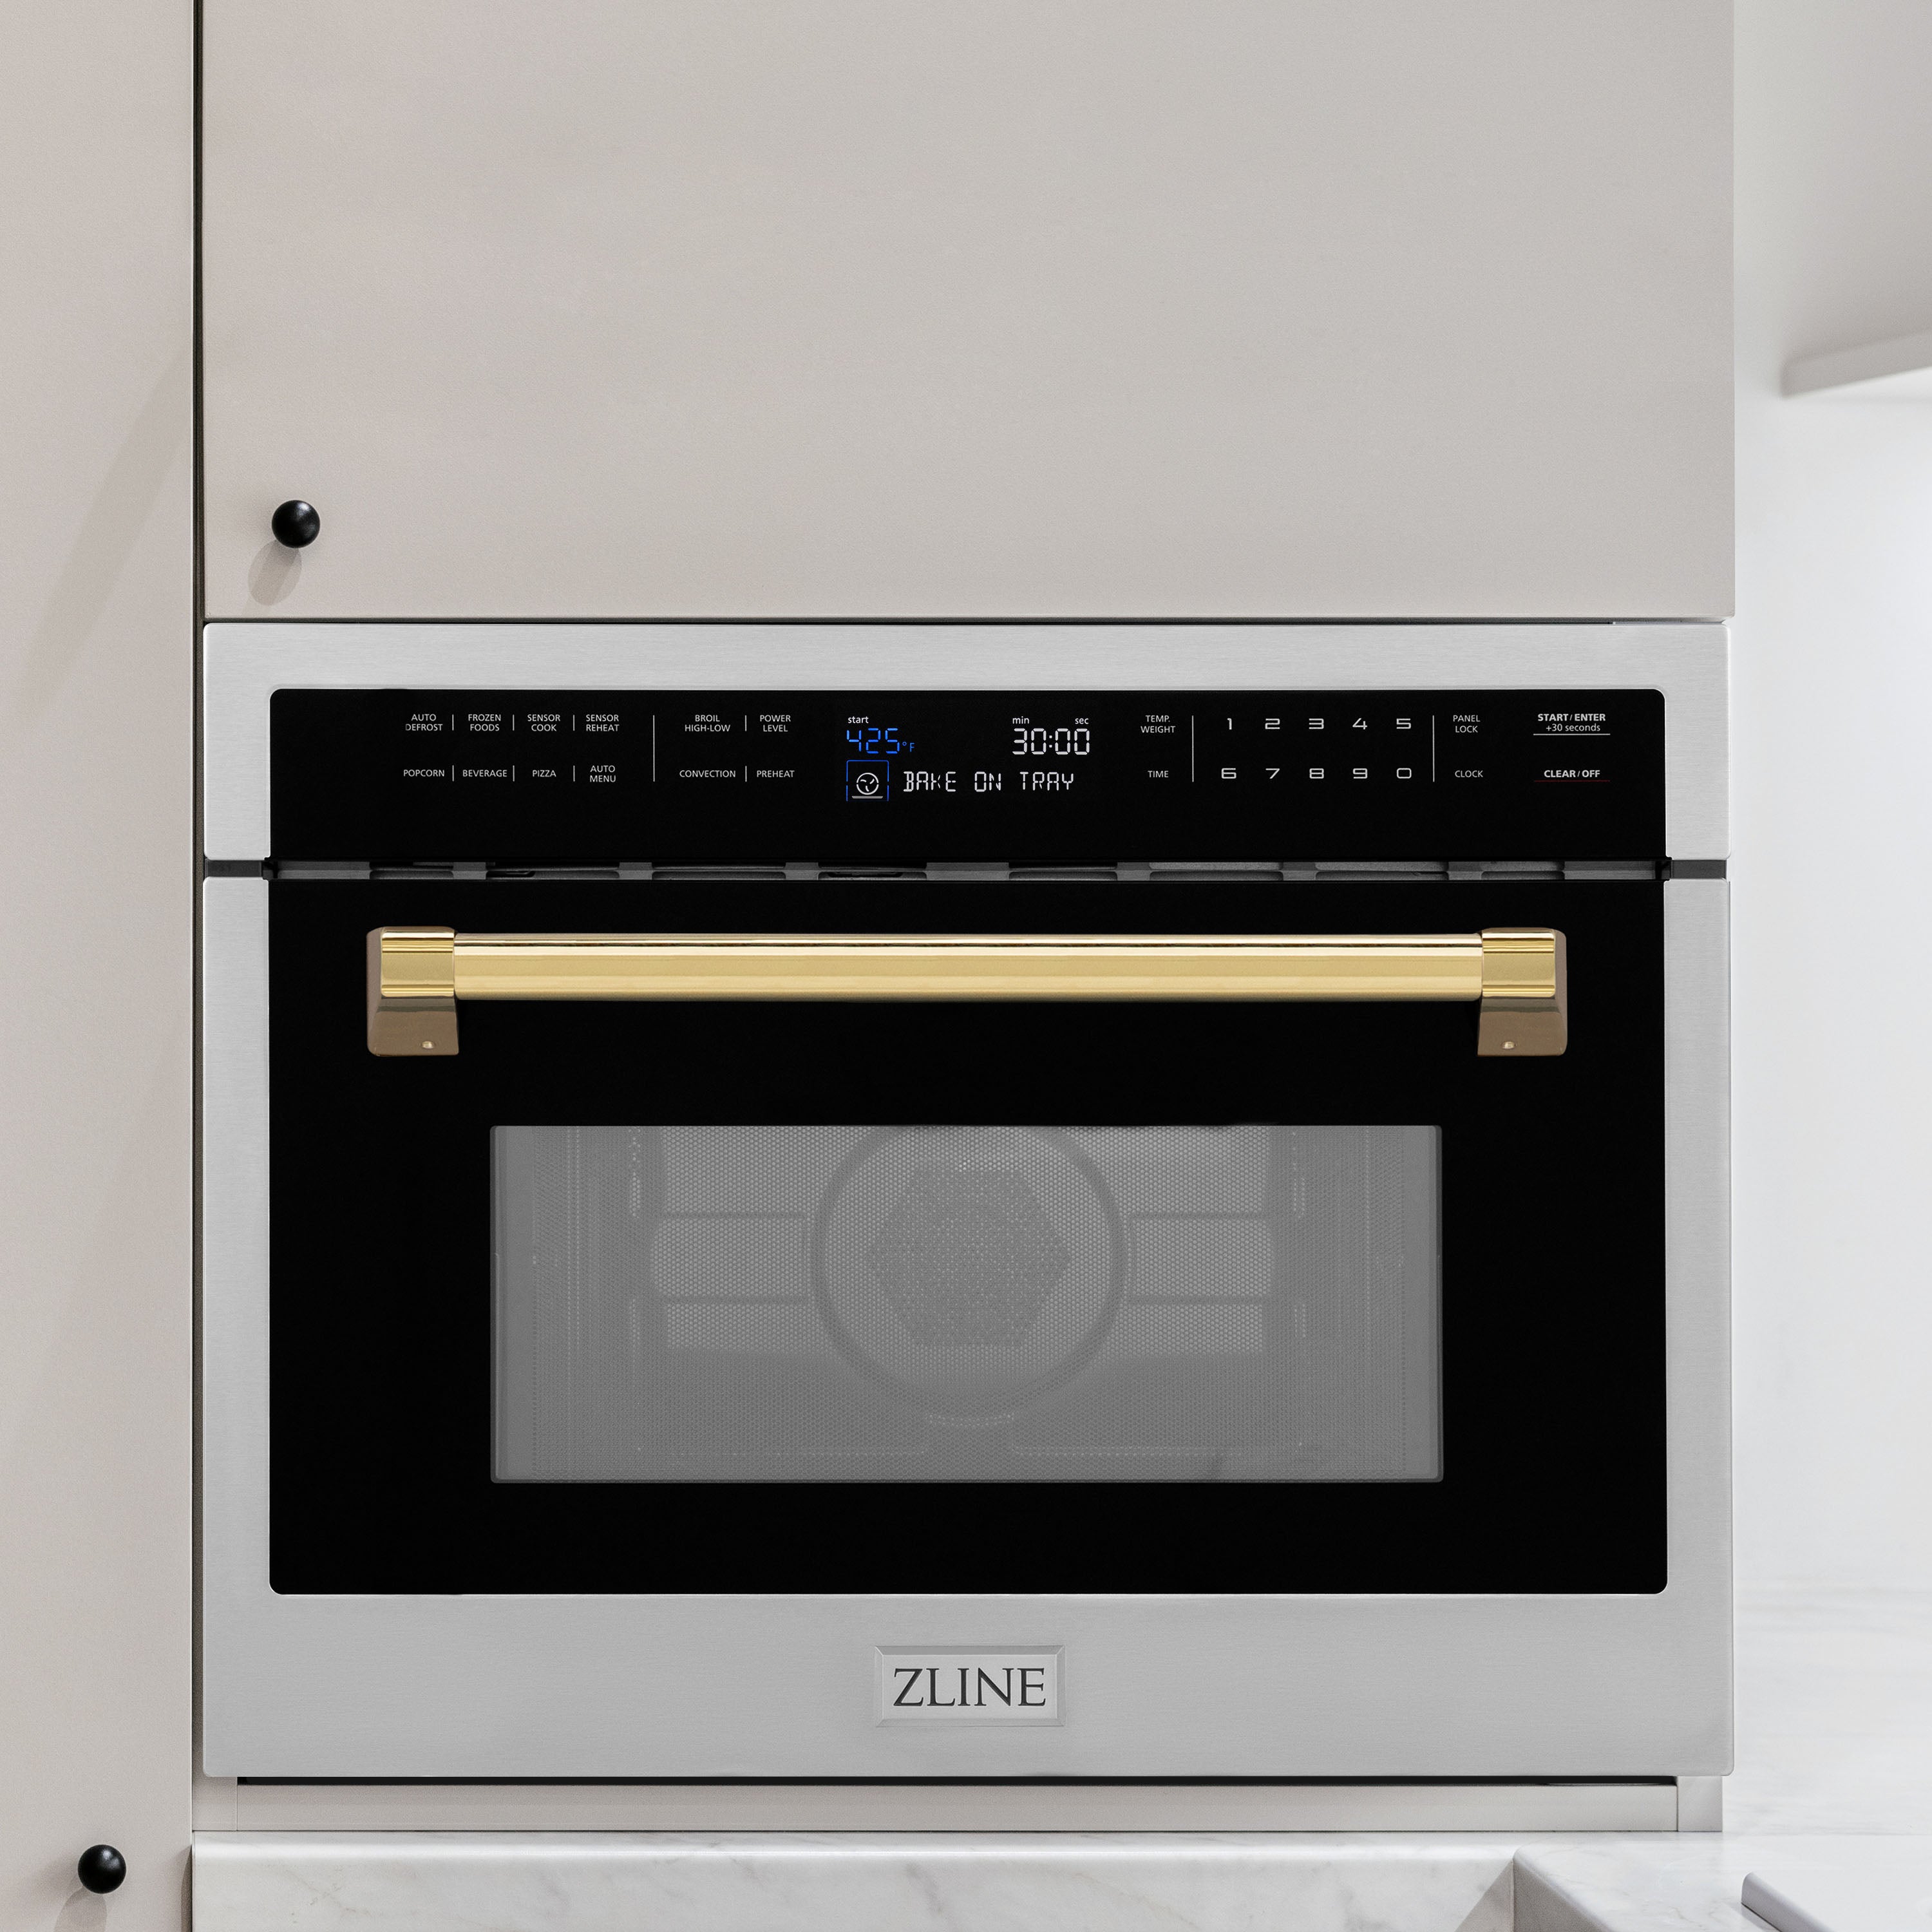 ZLINE Autograph Edition 24 in. 1.6 cu ft. Built-in Convection Microwave Oven in Stainless Steel with Polished Gold Accents built-in to white kitchen wall.